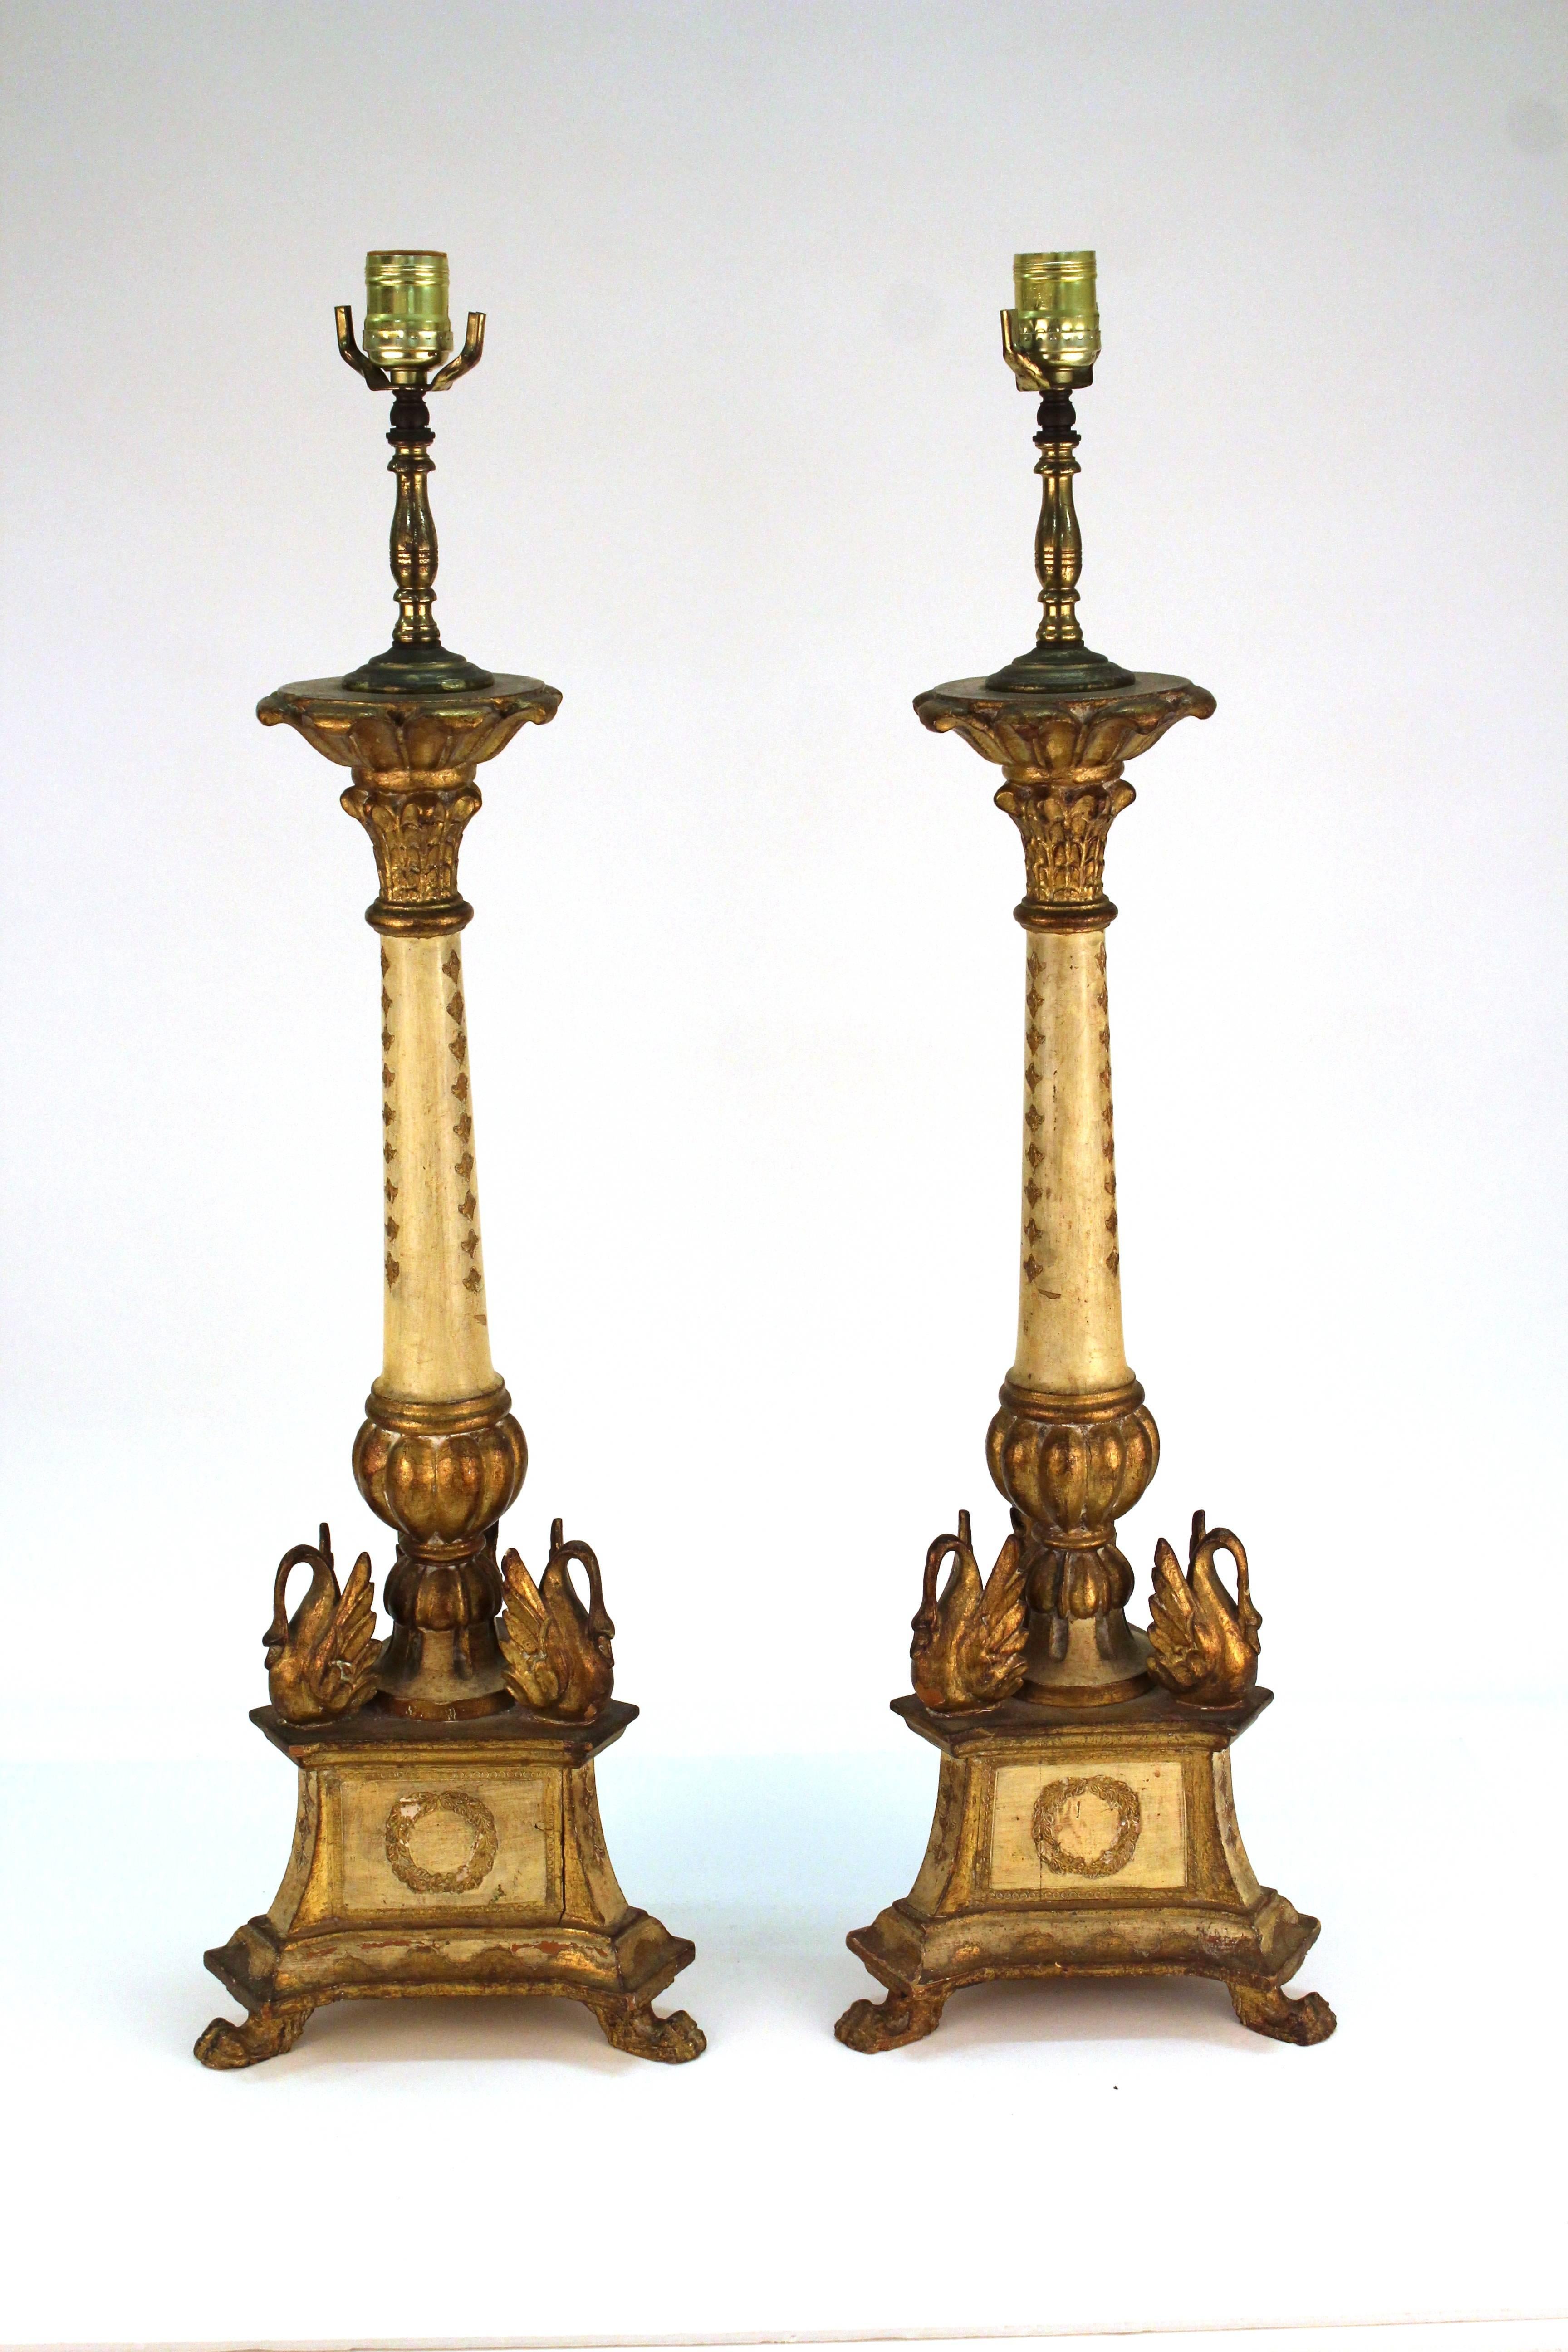 A pair of torchere table lamps with swans along the base. The lamps stand on three clawed feet that support a trunk decorated in wreaths. Marked [M. Italy] on the bottom. The pair are giltwood with minor wear appropriate to age and use. The lamps